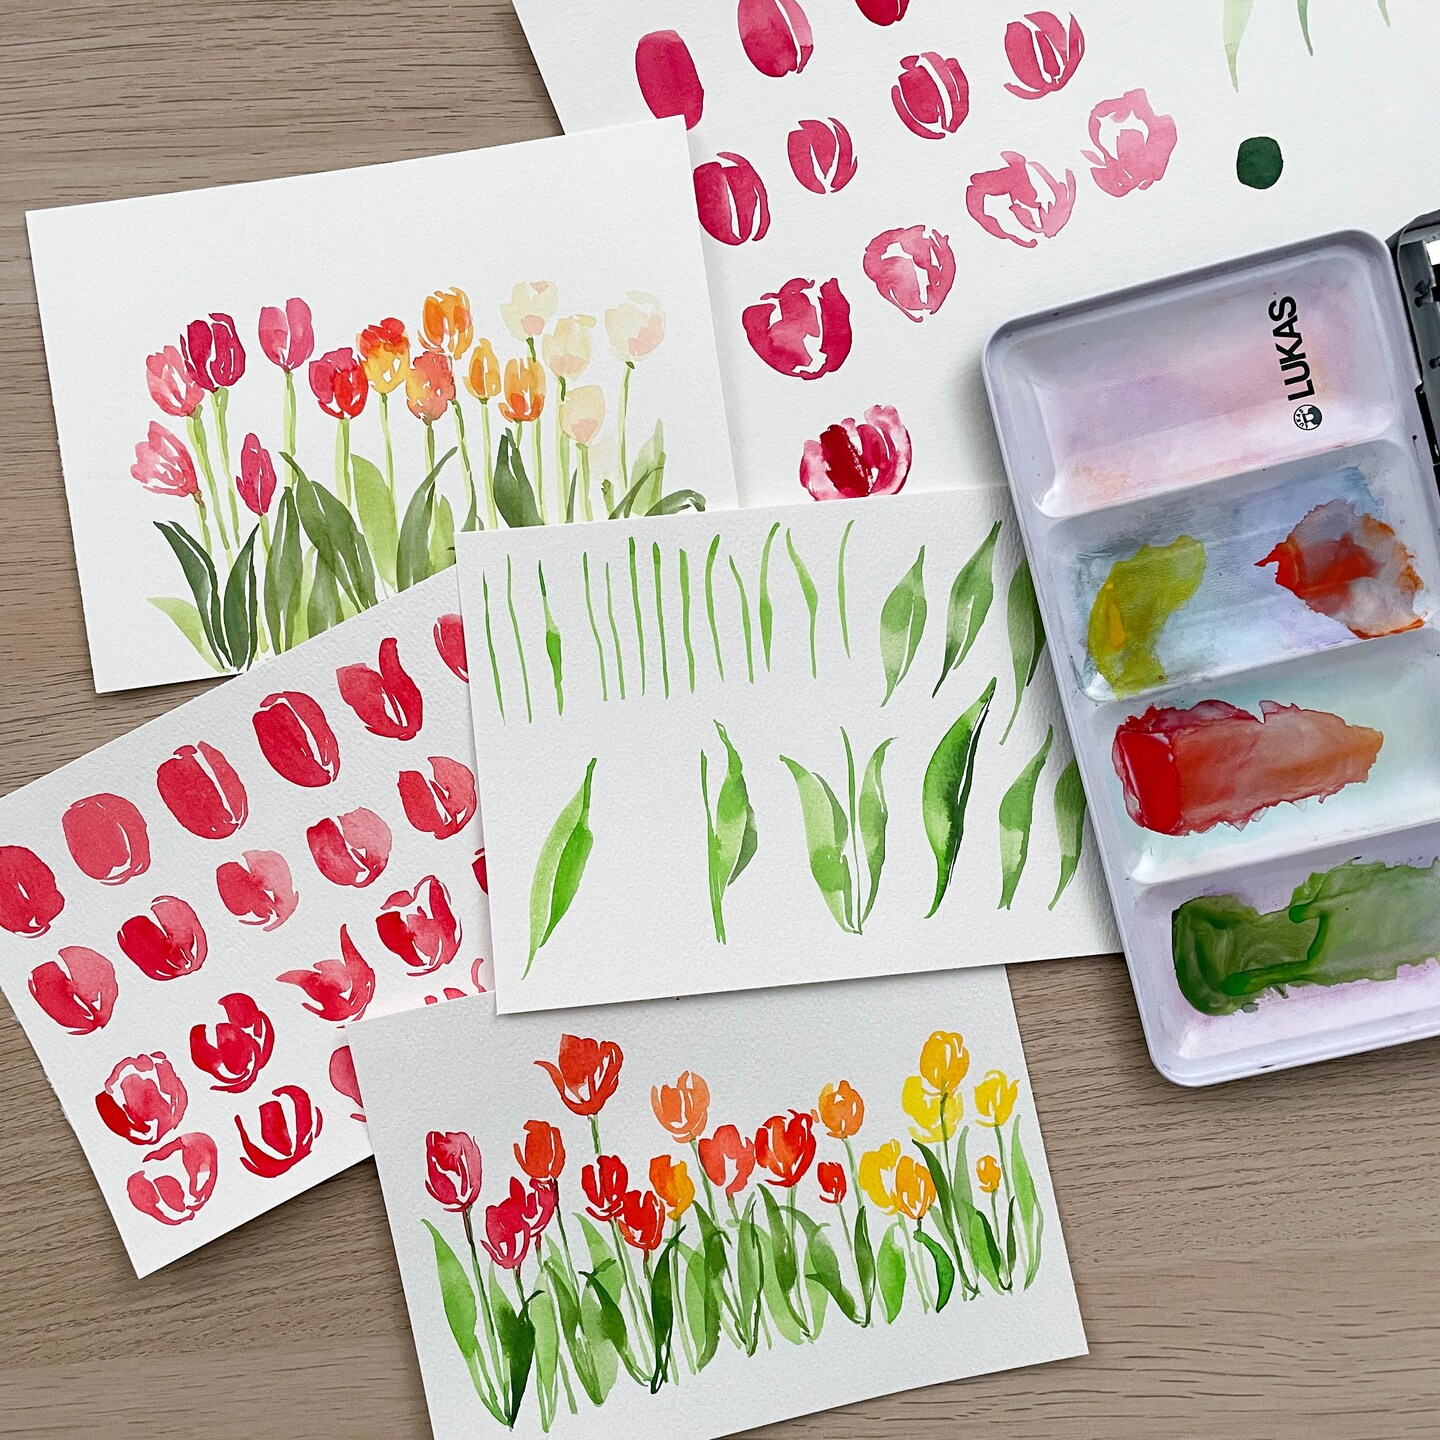 How to Paint: Loose Watercolor Tulips